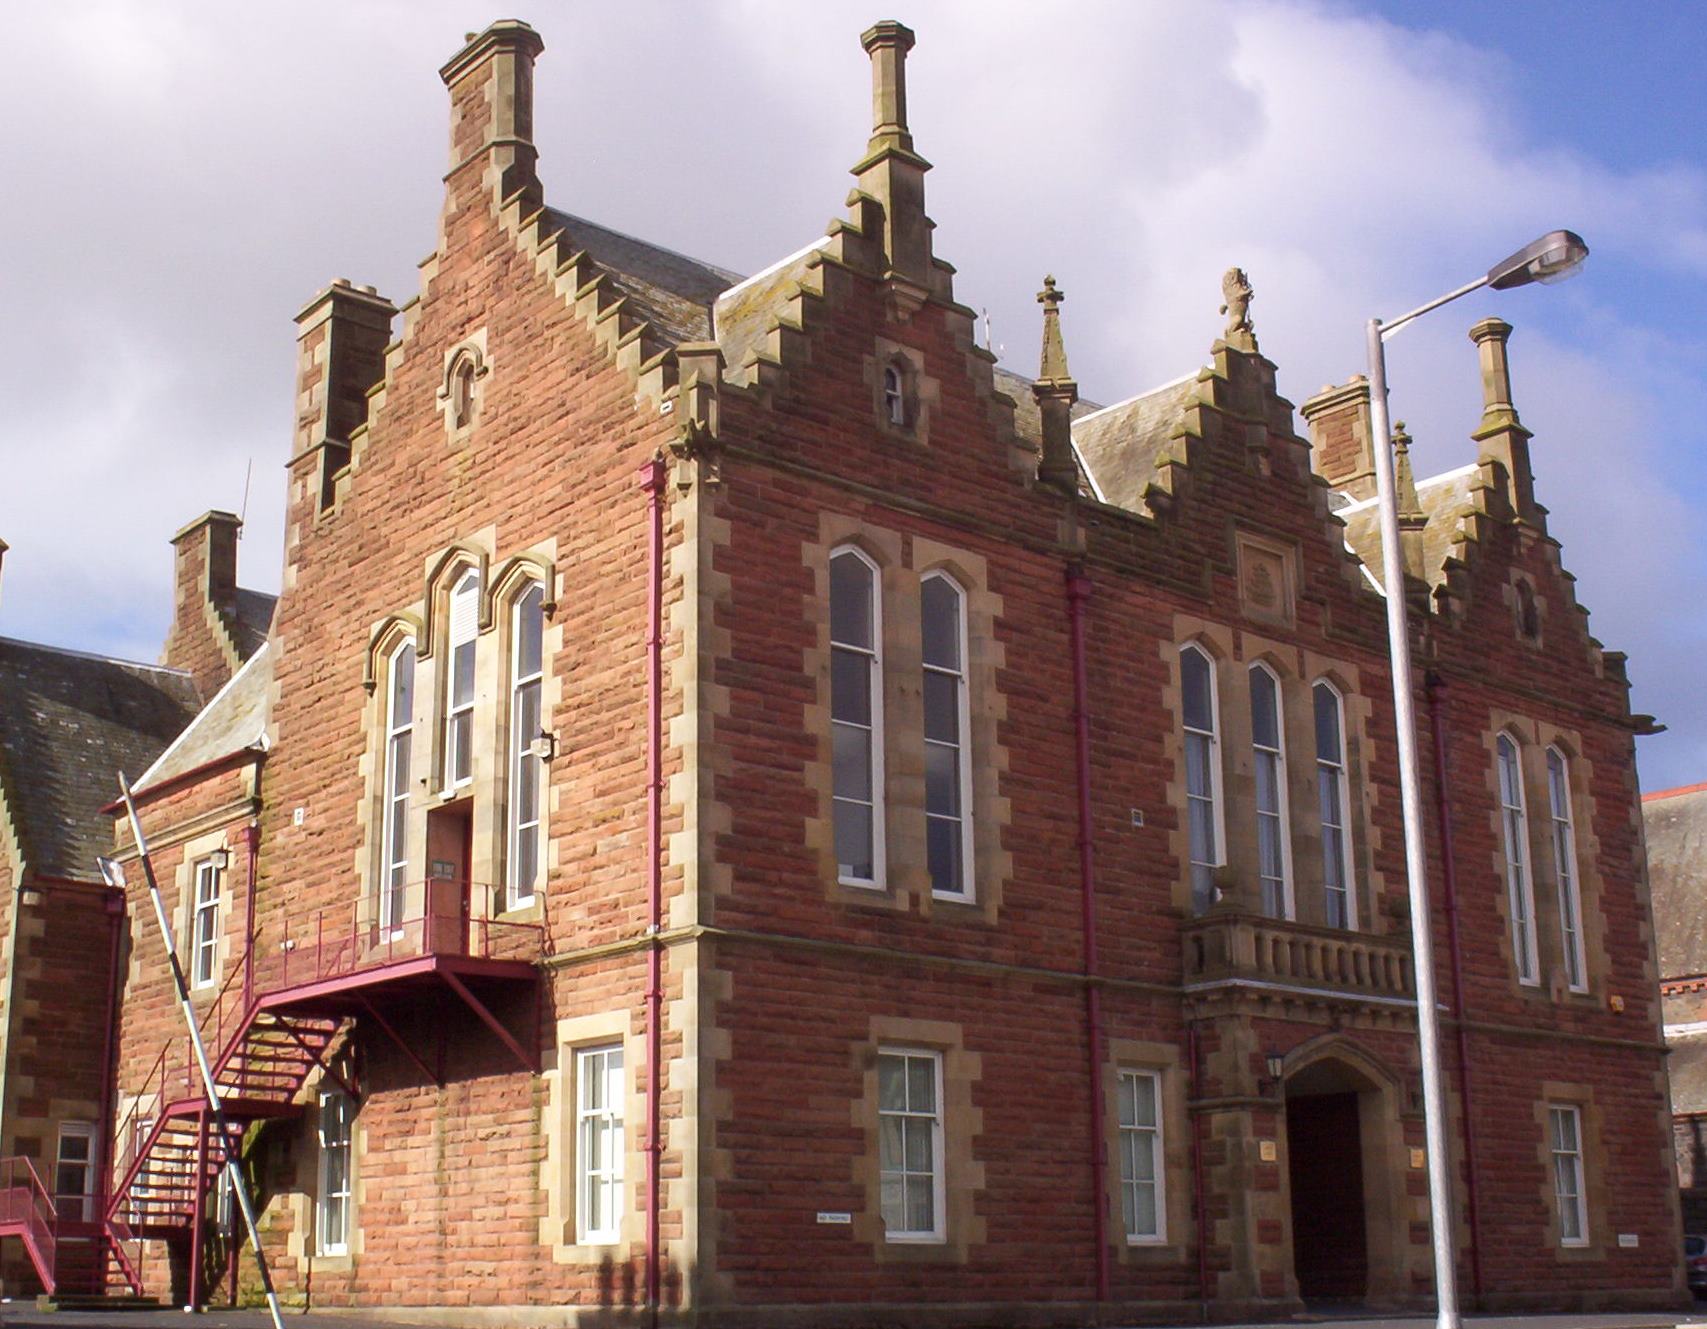 Exterior of Stranraer Sheriff Court and Justice of the Peace Court